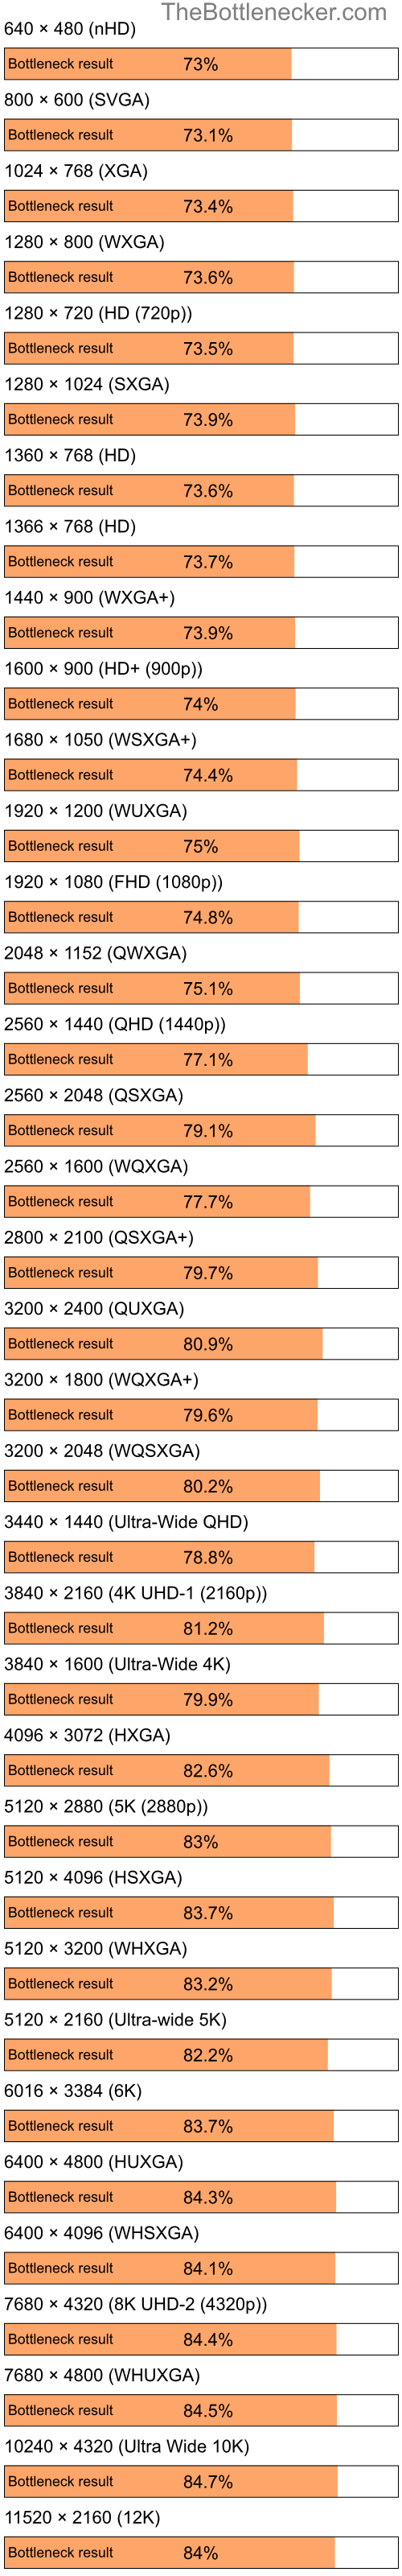 Bottleneck results by resolution for Intel Celeron M 420 and AMD Mobility Radeon 4100 in Graphic Card Intense Tasks